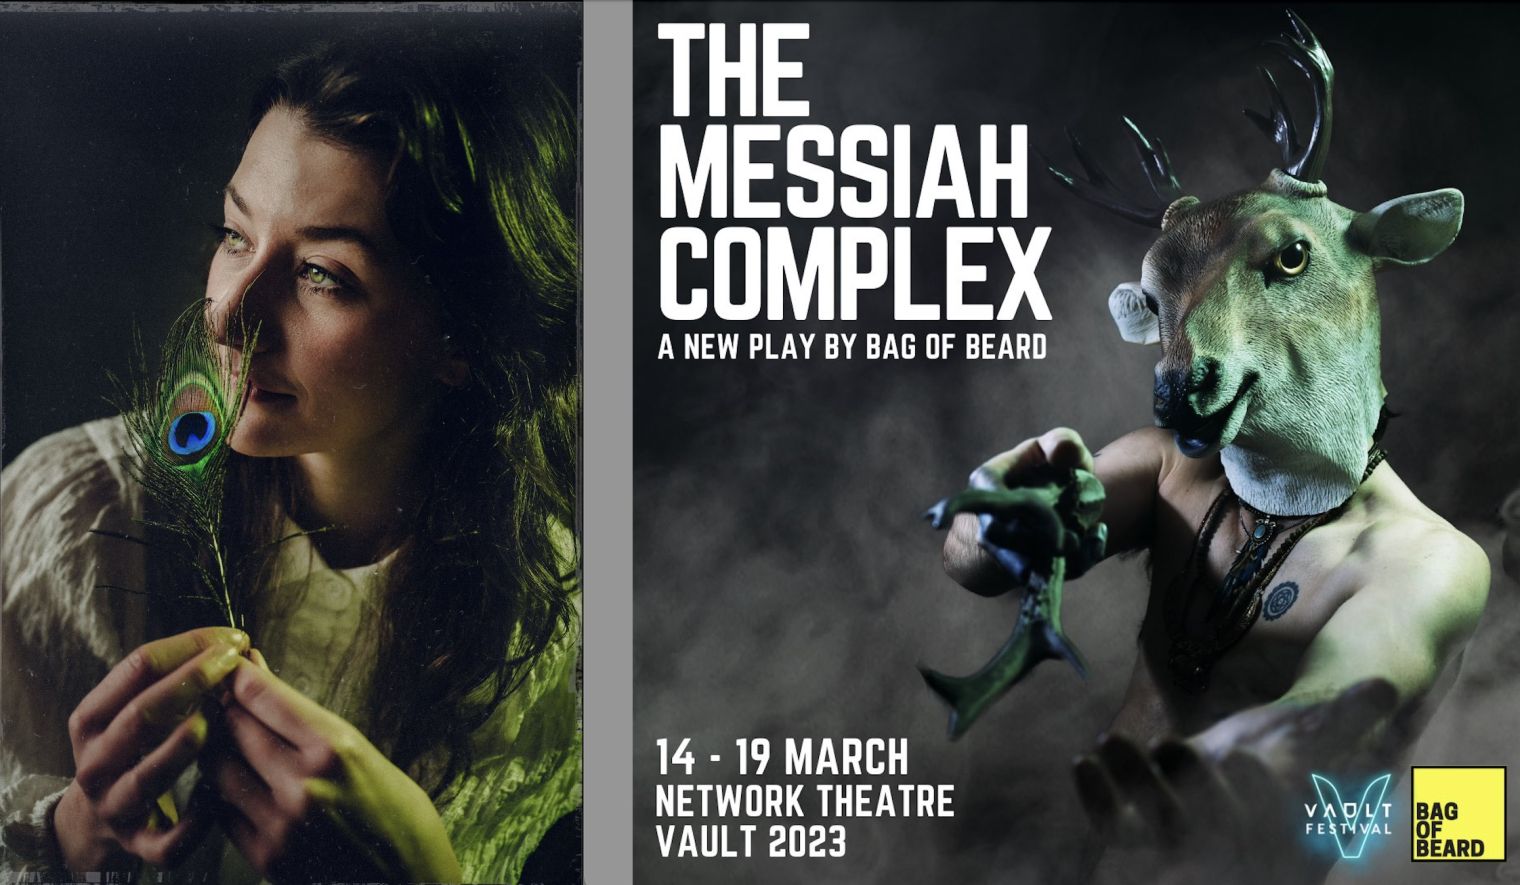 AK Golding stars as Sophia in The Messiah Complex from tomorrow at London's Vault Festival